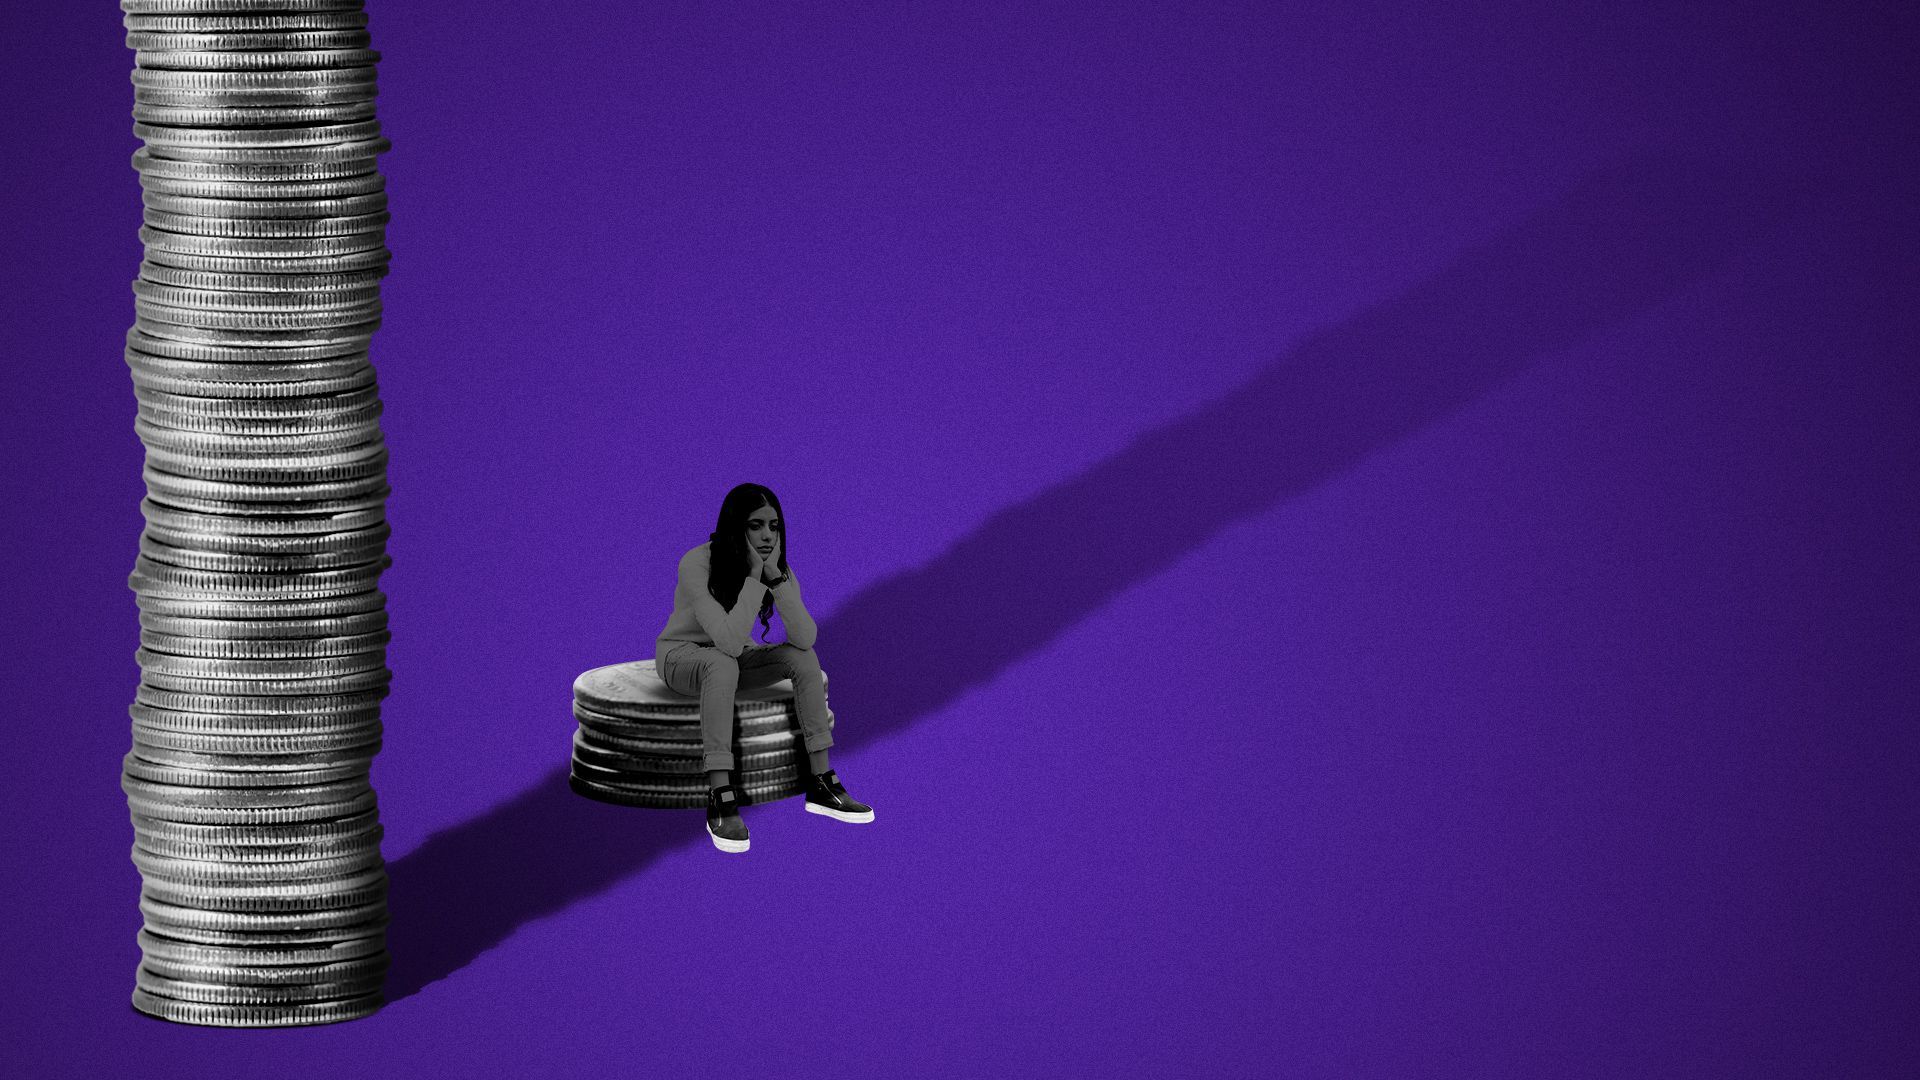 Illustration of a woman sitting on a very small stack of coins